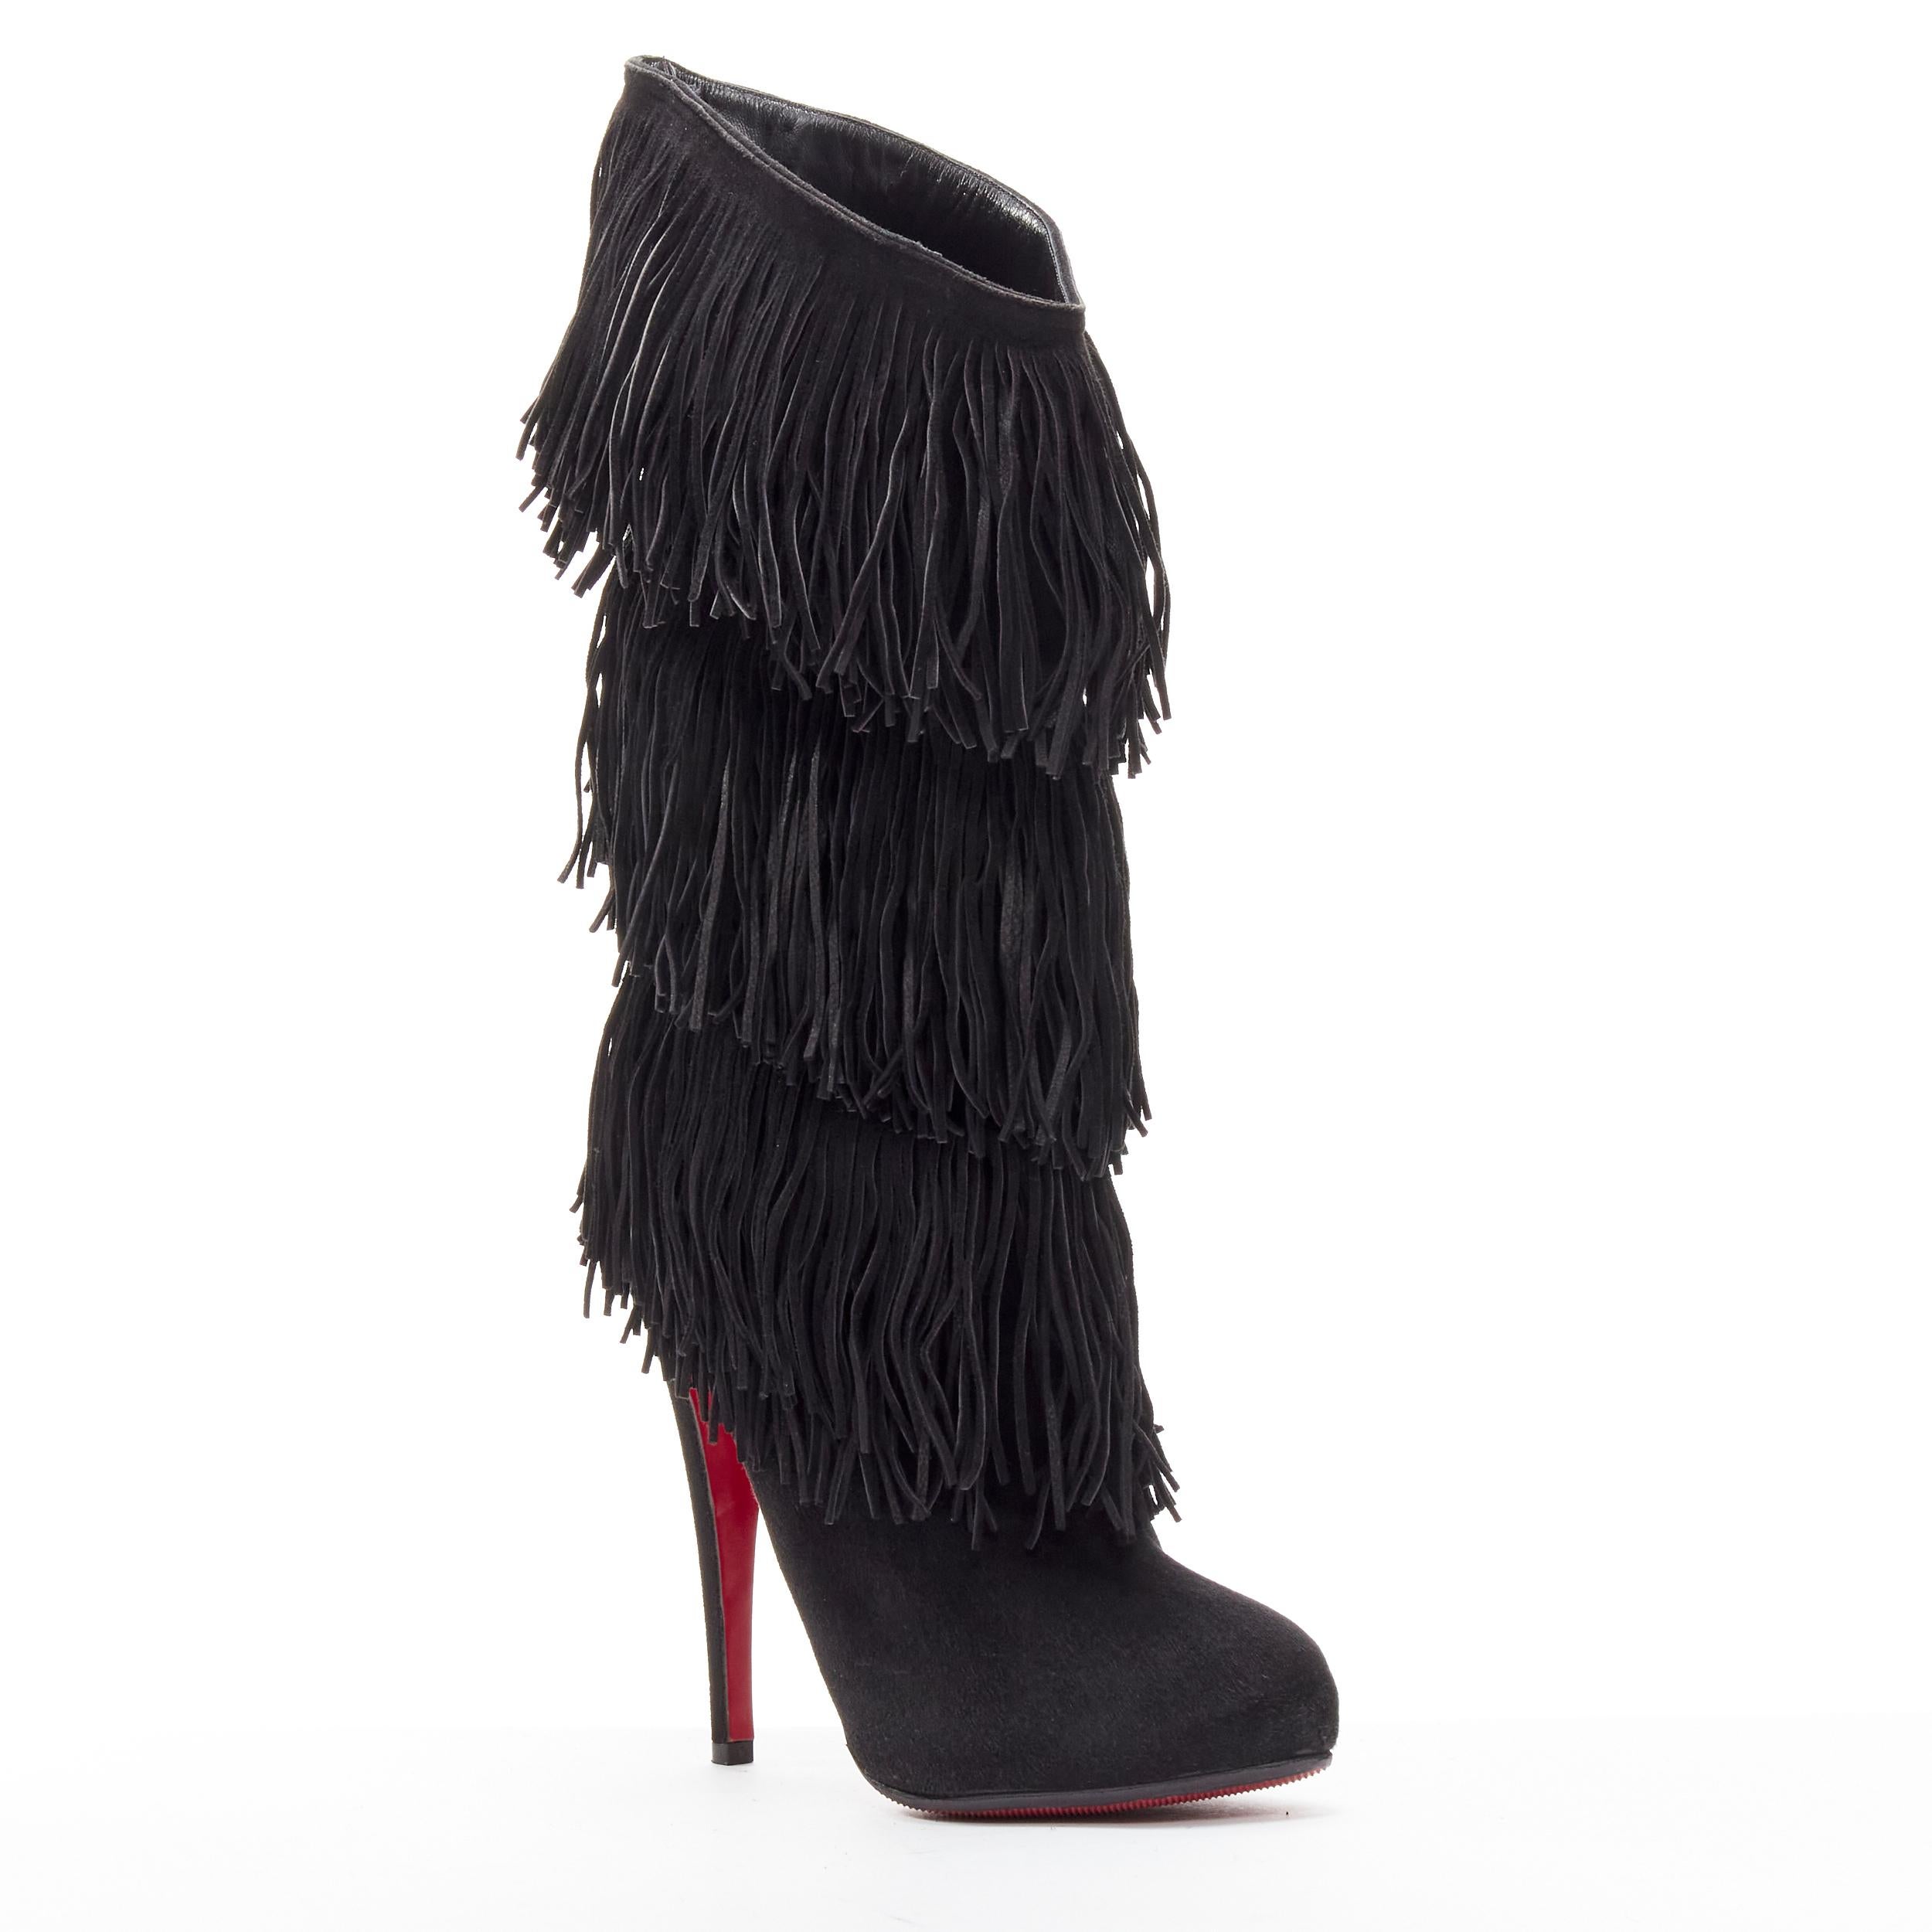 CHRISTIAN LOUBOUTIN Forever Tina 130 black suede fringe platform boots EU37.5
Reference: LNKO/A02104
Brand: Christian Louboutin
Model: Forever Tina 130
Material: Suede
Color: Black
Pattern: Solid
Closure: Slip On
Lining: Leather
Made in: